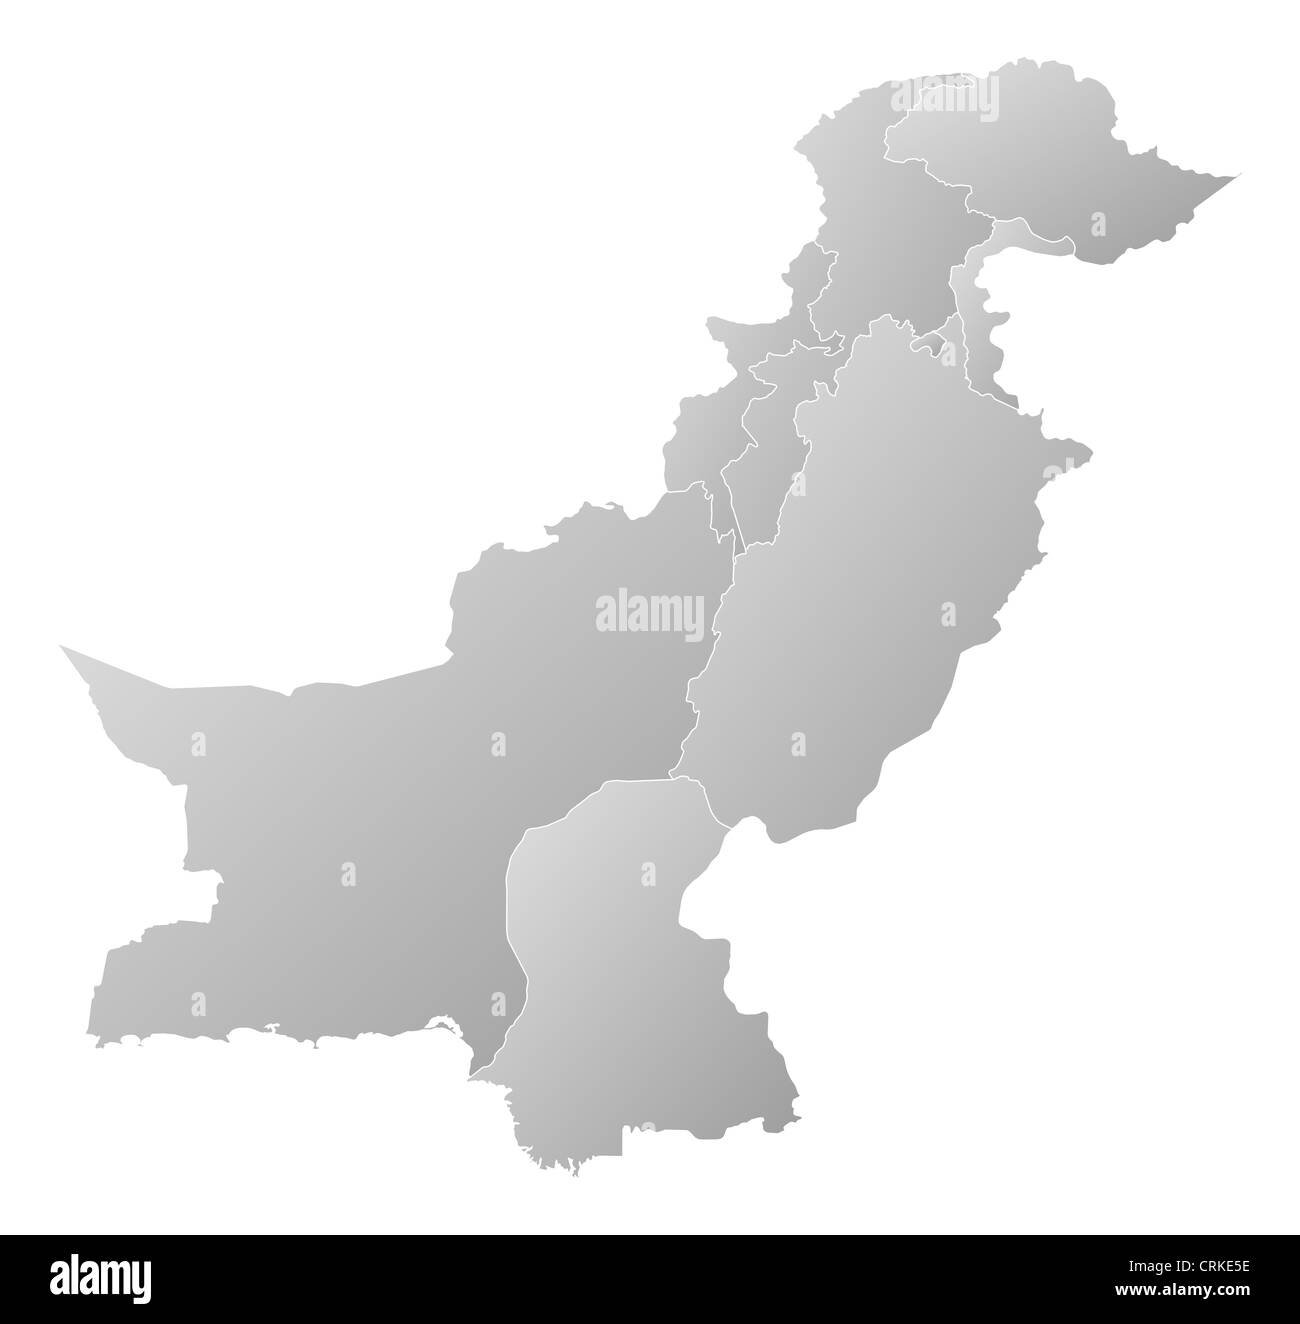 Political map of Pakistan with the several provinces. Stock Photo